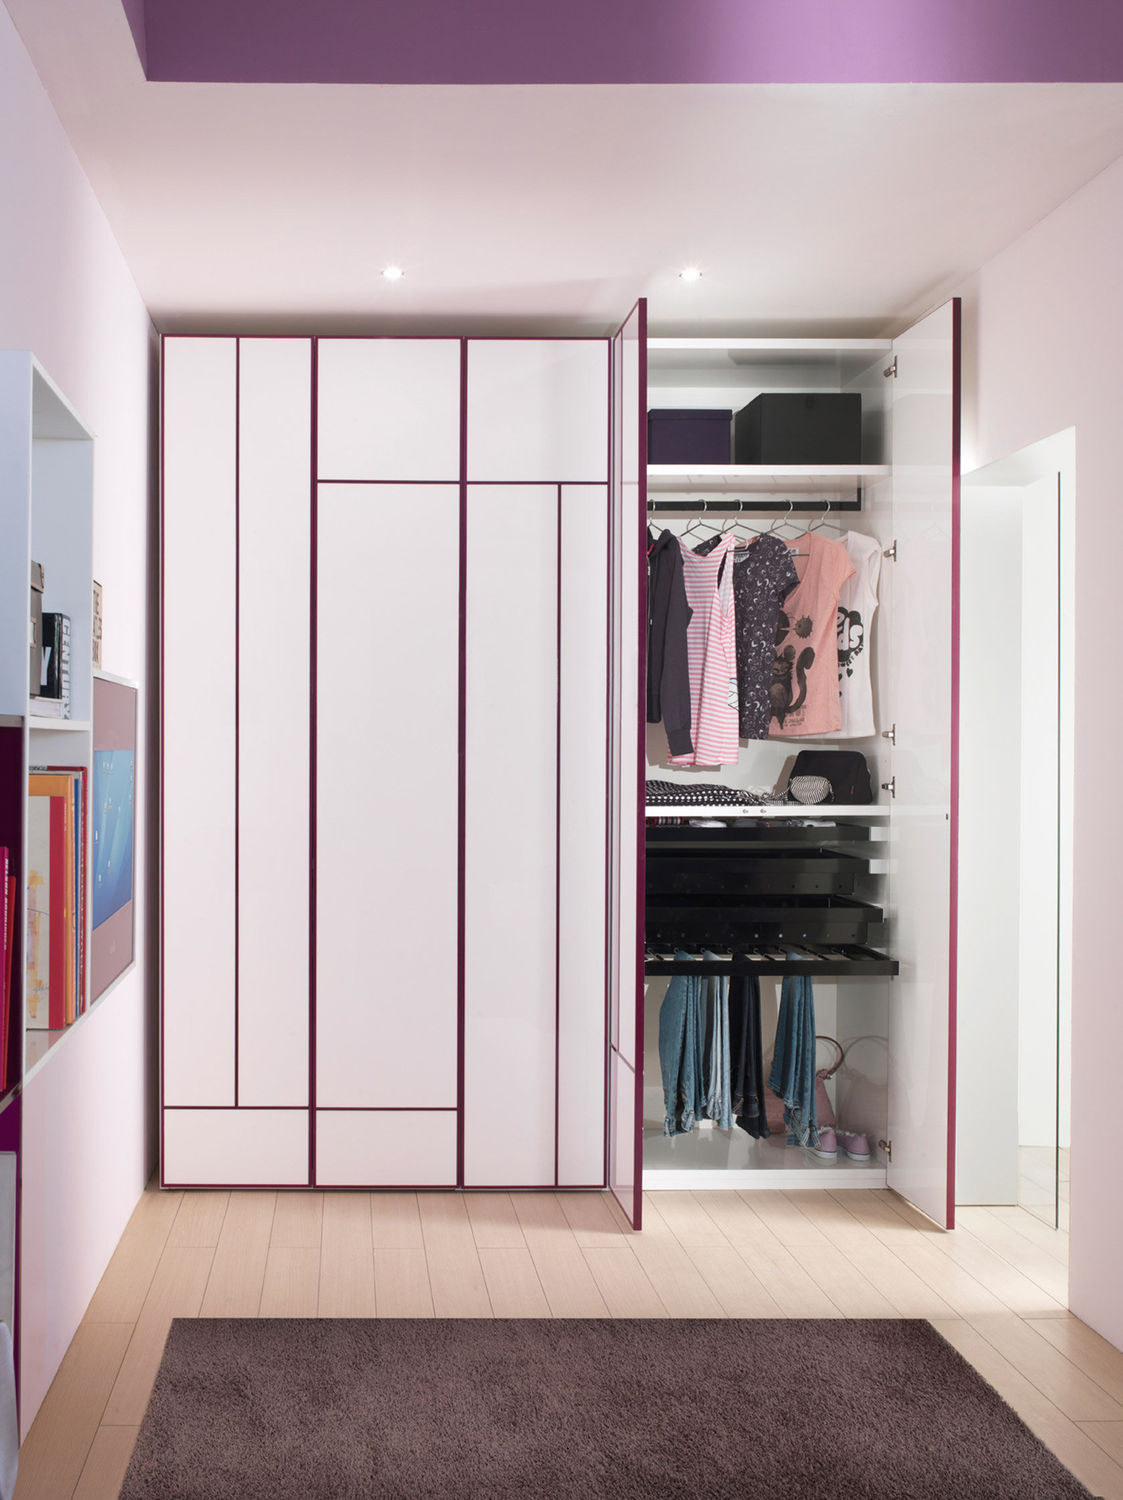 Small Cabinet For Bedroom
 Bedroom Wardrobe Designs For Small Rooms Simple Design